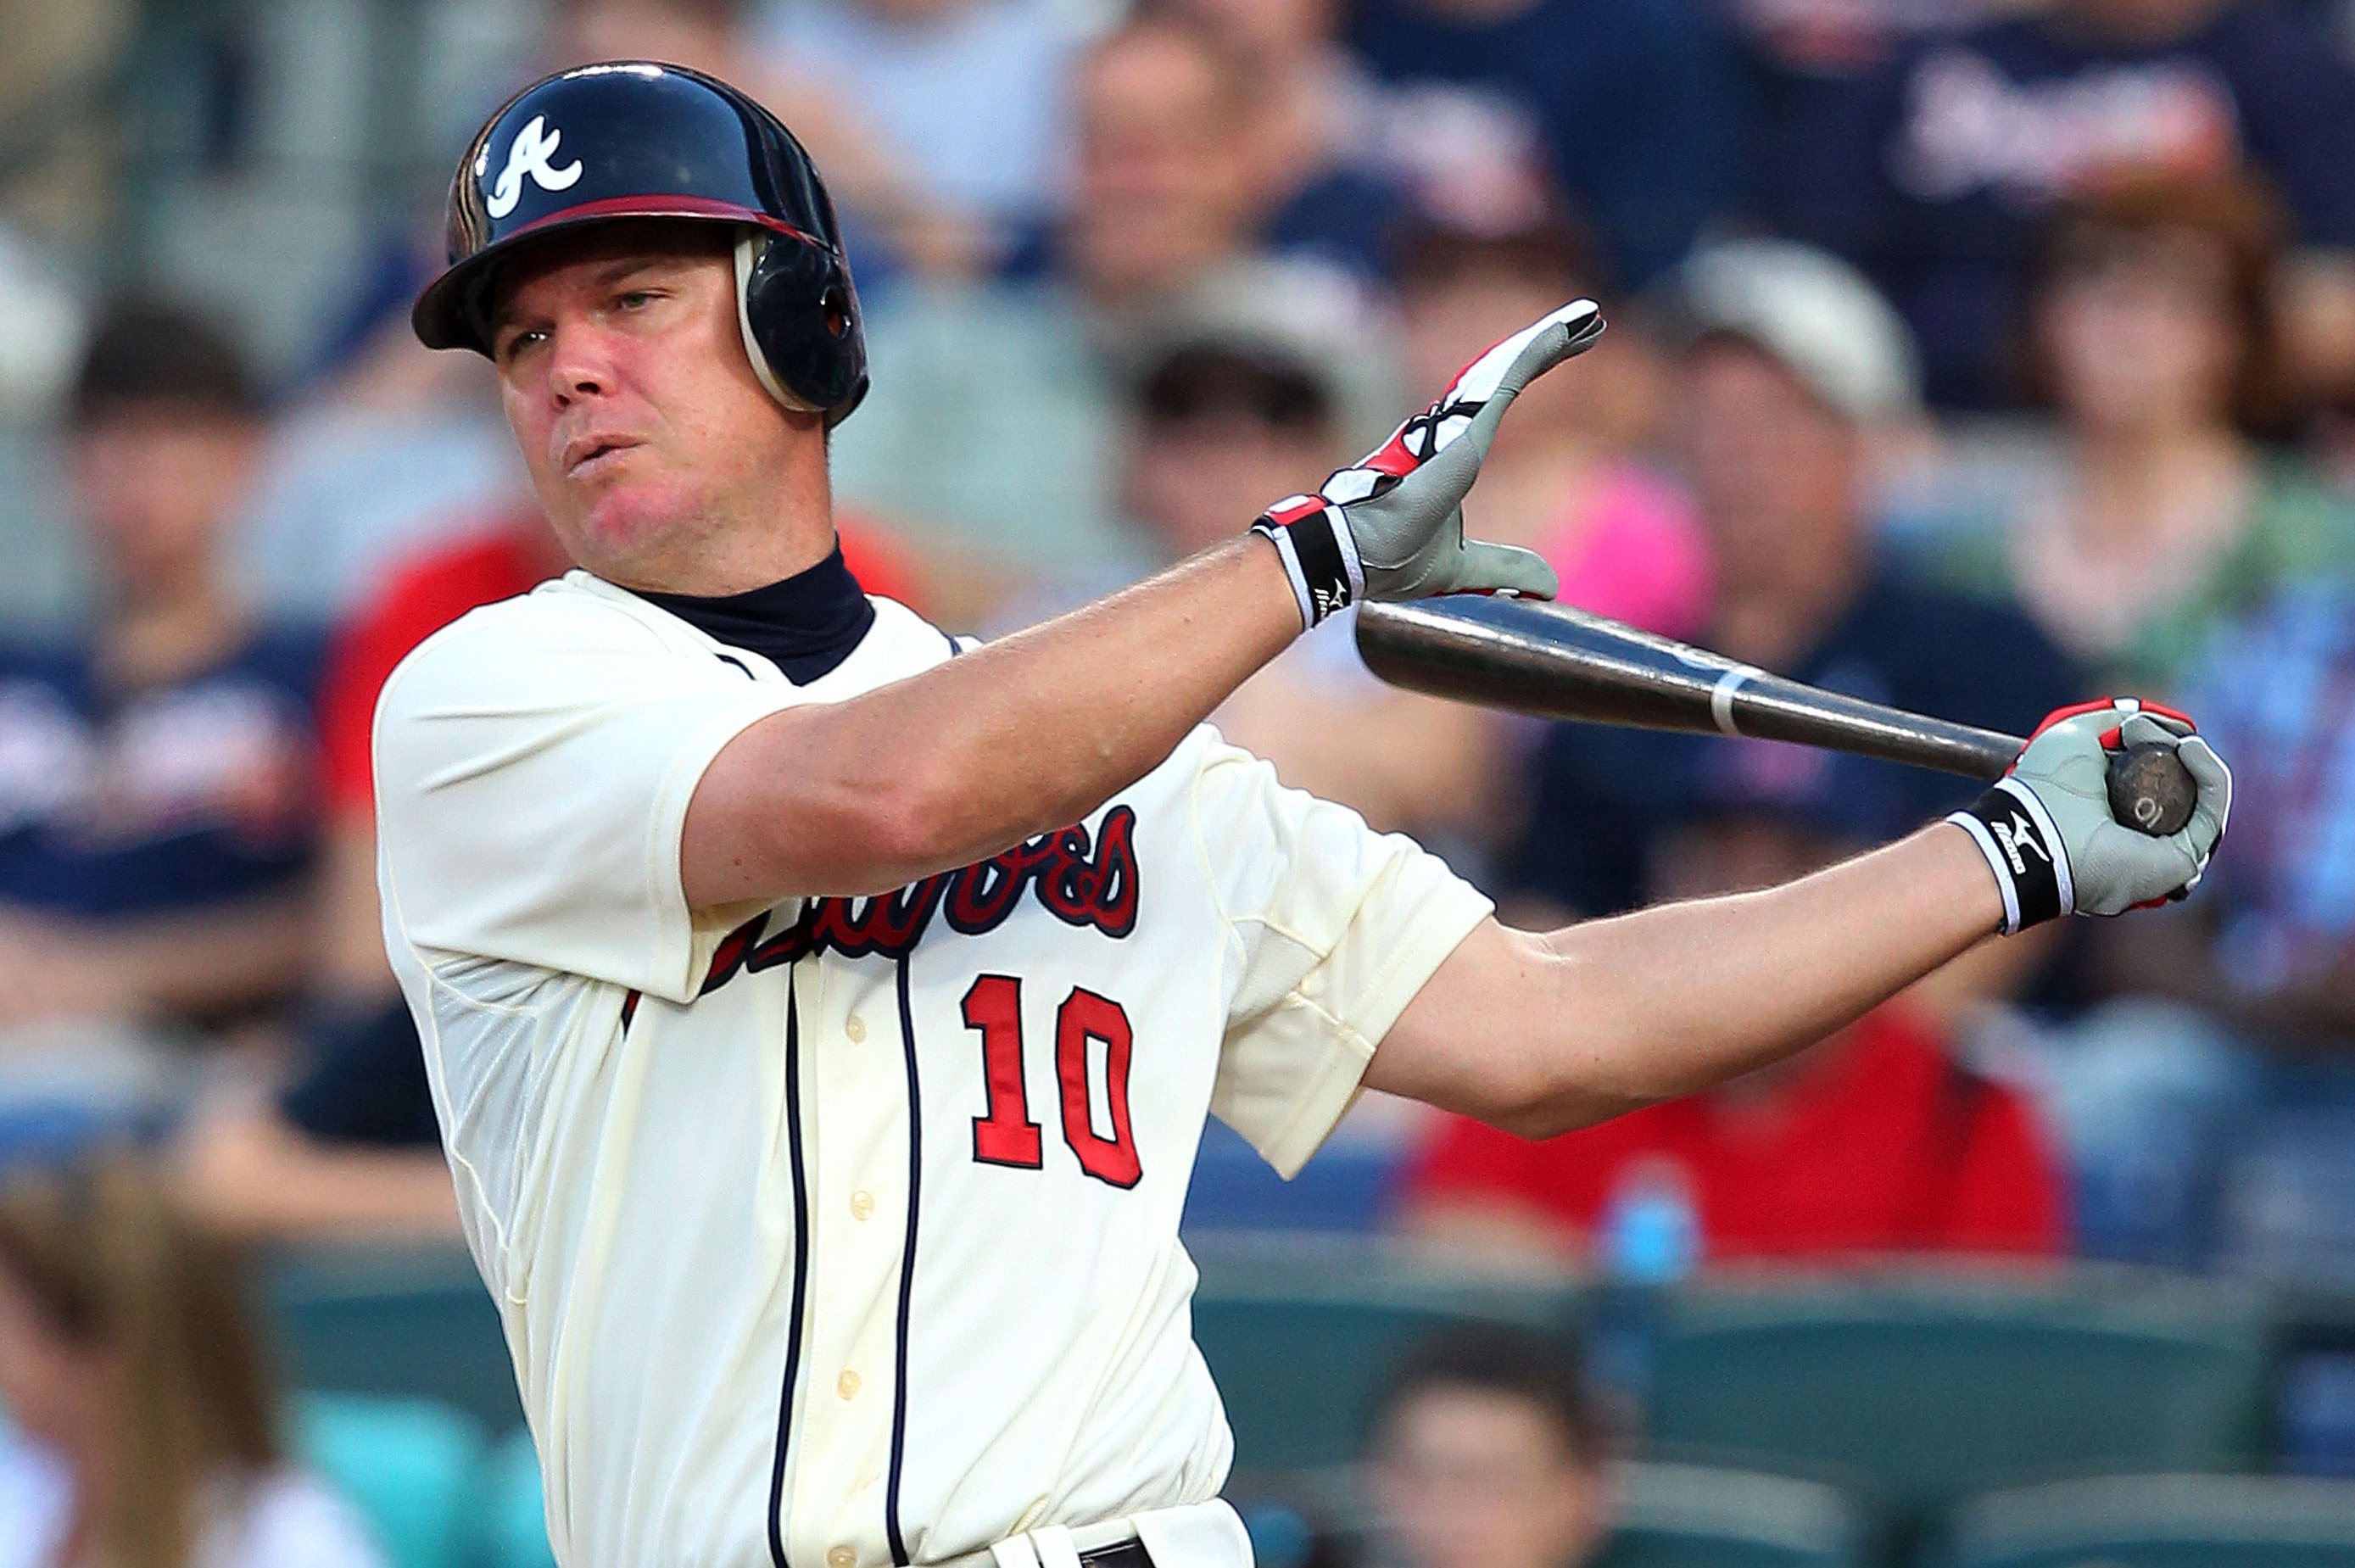 Legacy Man: 10 fun facts about Chipper Jones' HOF career with Braves